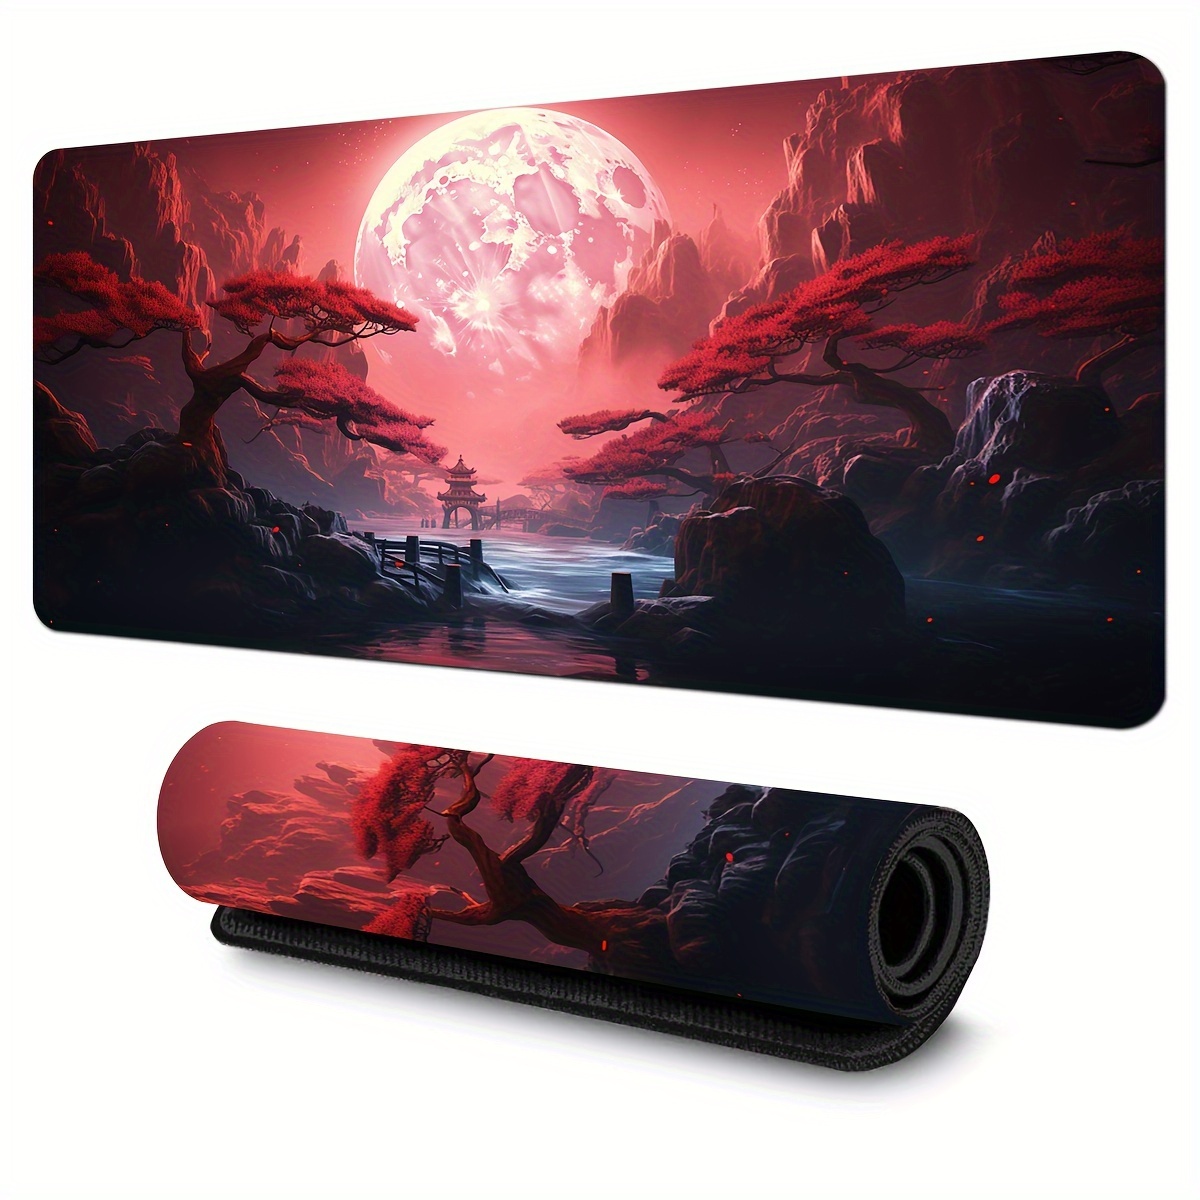 

Red Landscape Large Gaming Mouse Pad,laptop/desktop Office Use Non-slip Rubber Base Mousepad Stitched Edges Keyboard Desk Pad For Schools, Offices, Home And Company,super Cool Office Large Mouse Pad